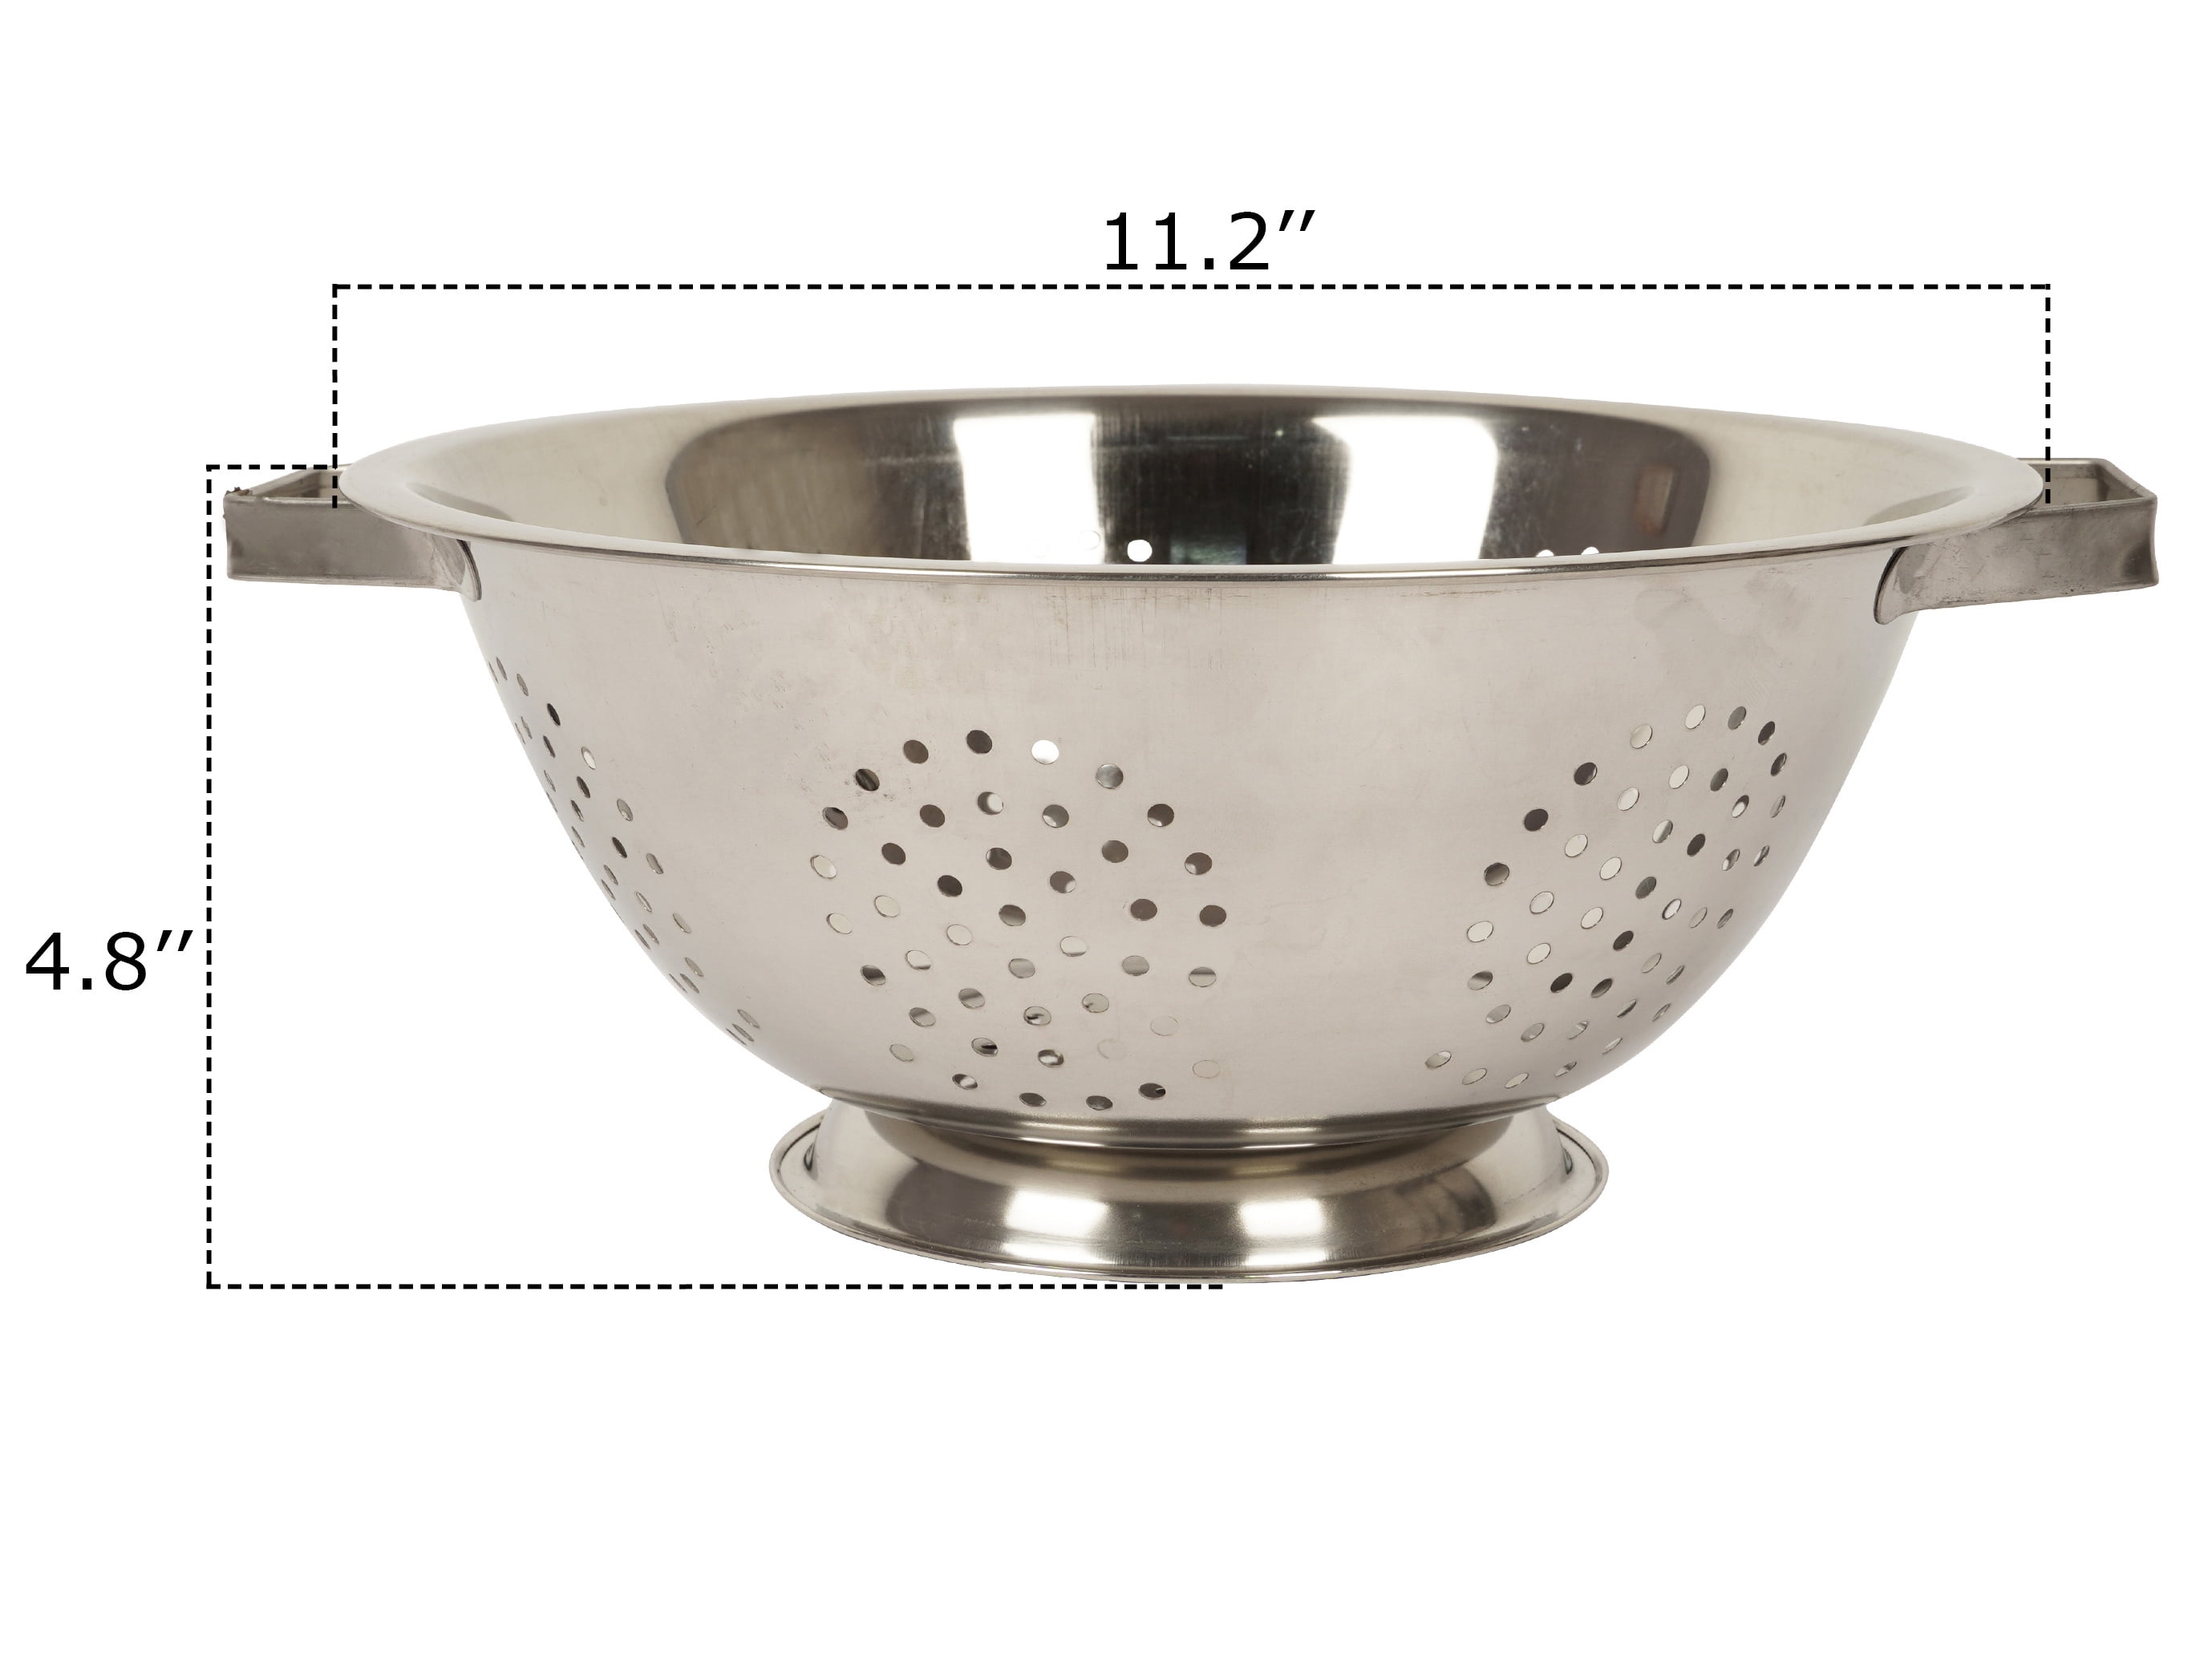 Trifri Stainless Steel Colander Safe Kitchen Strainer With Large Stable Base Self,Draining Bowl W/ - Walmart.com